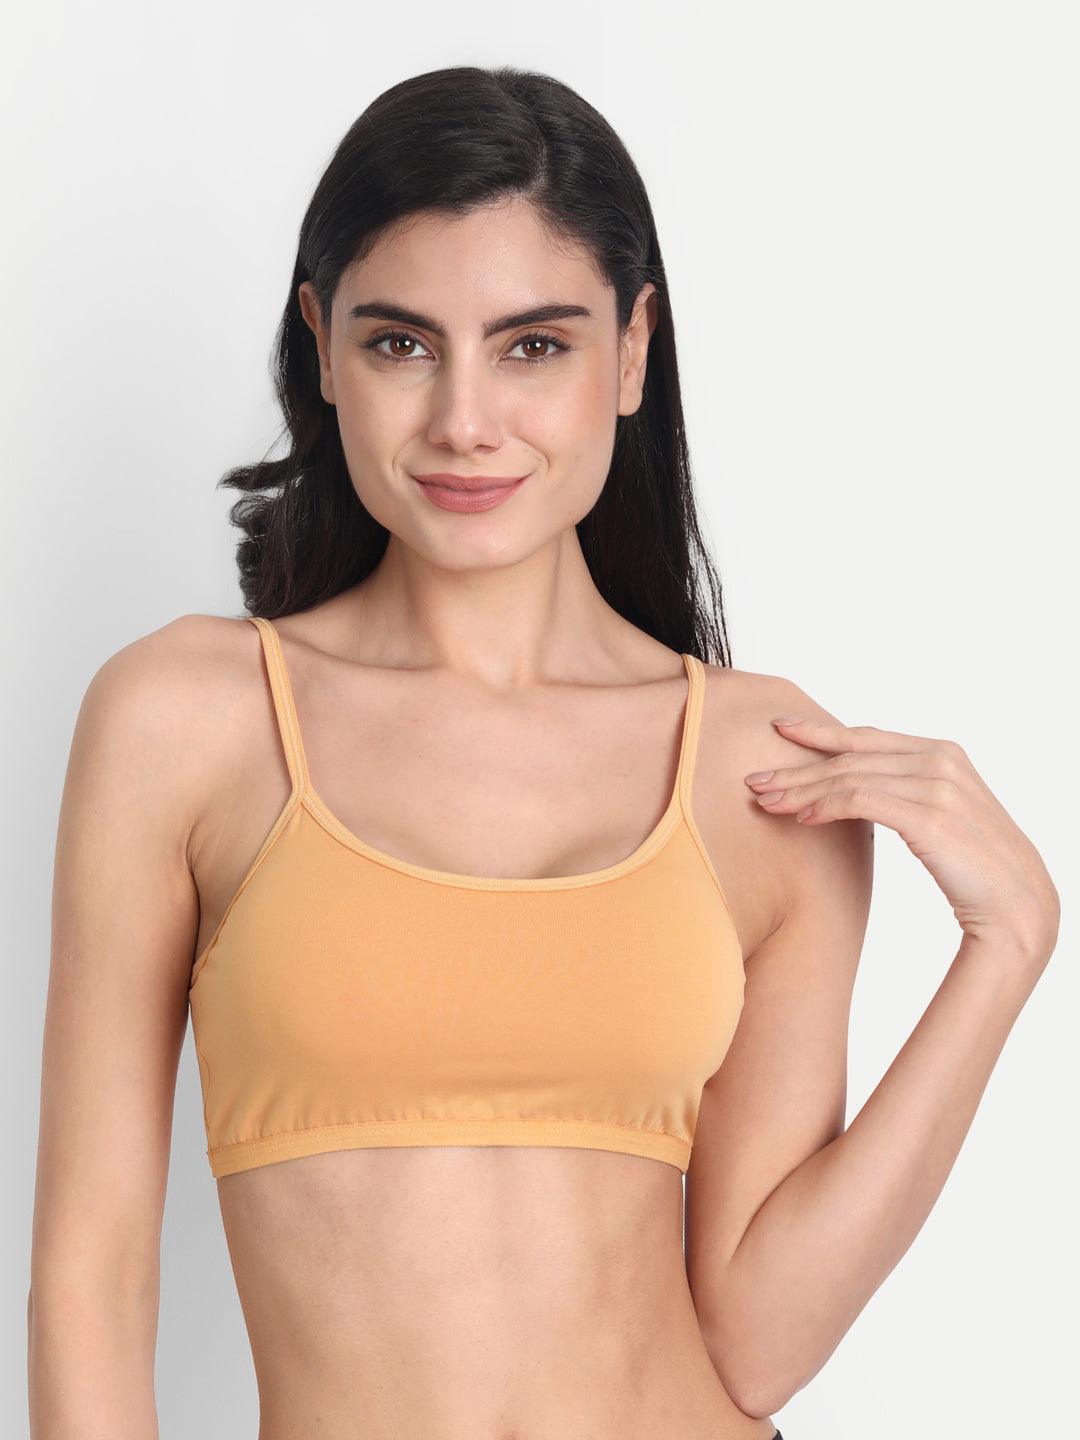 Women's Cotton Non-Padded Non-Wired Thin Strap Low Coverage Sports Bra